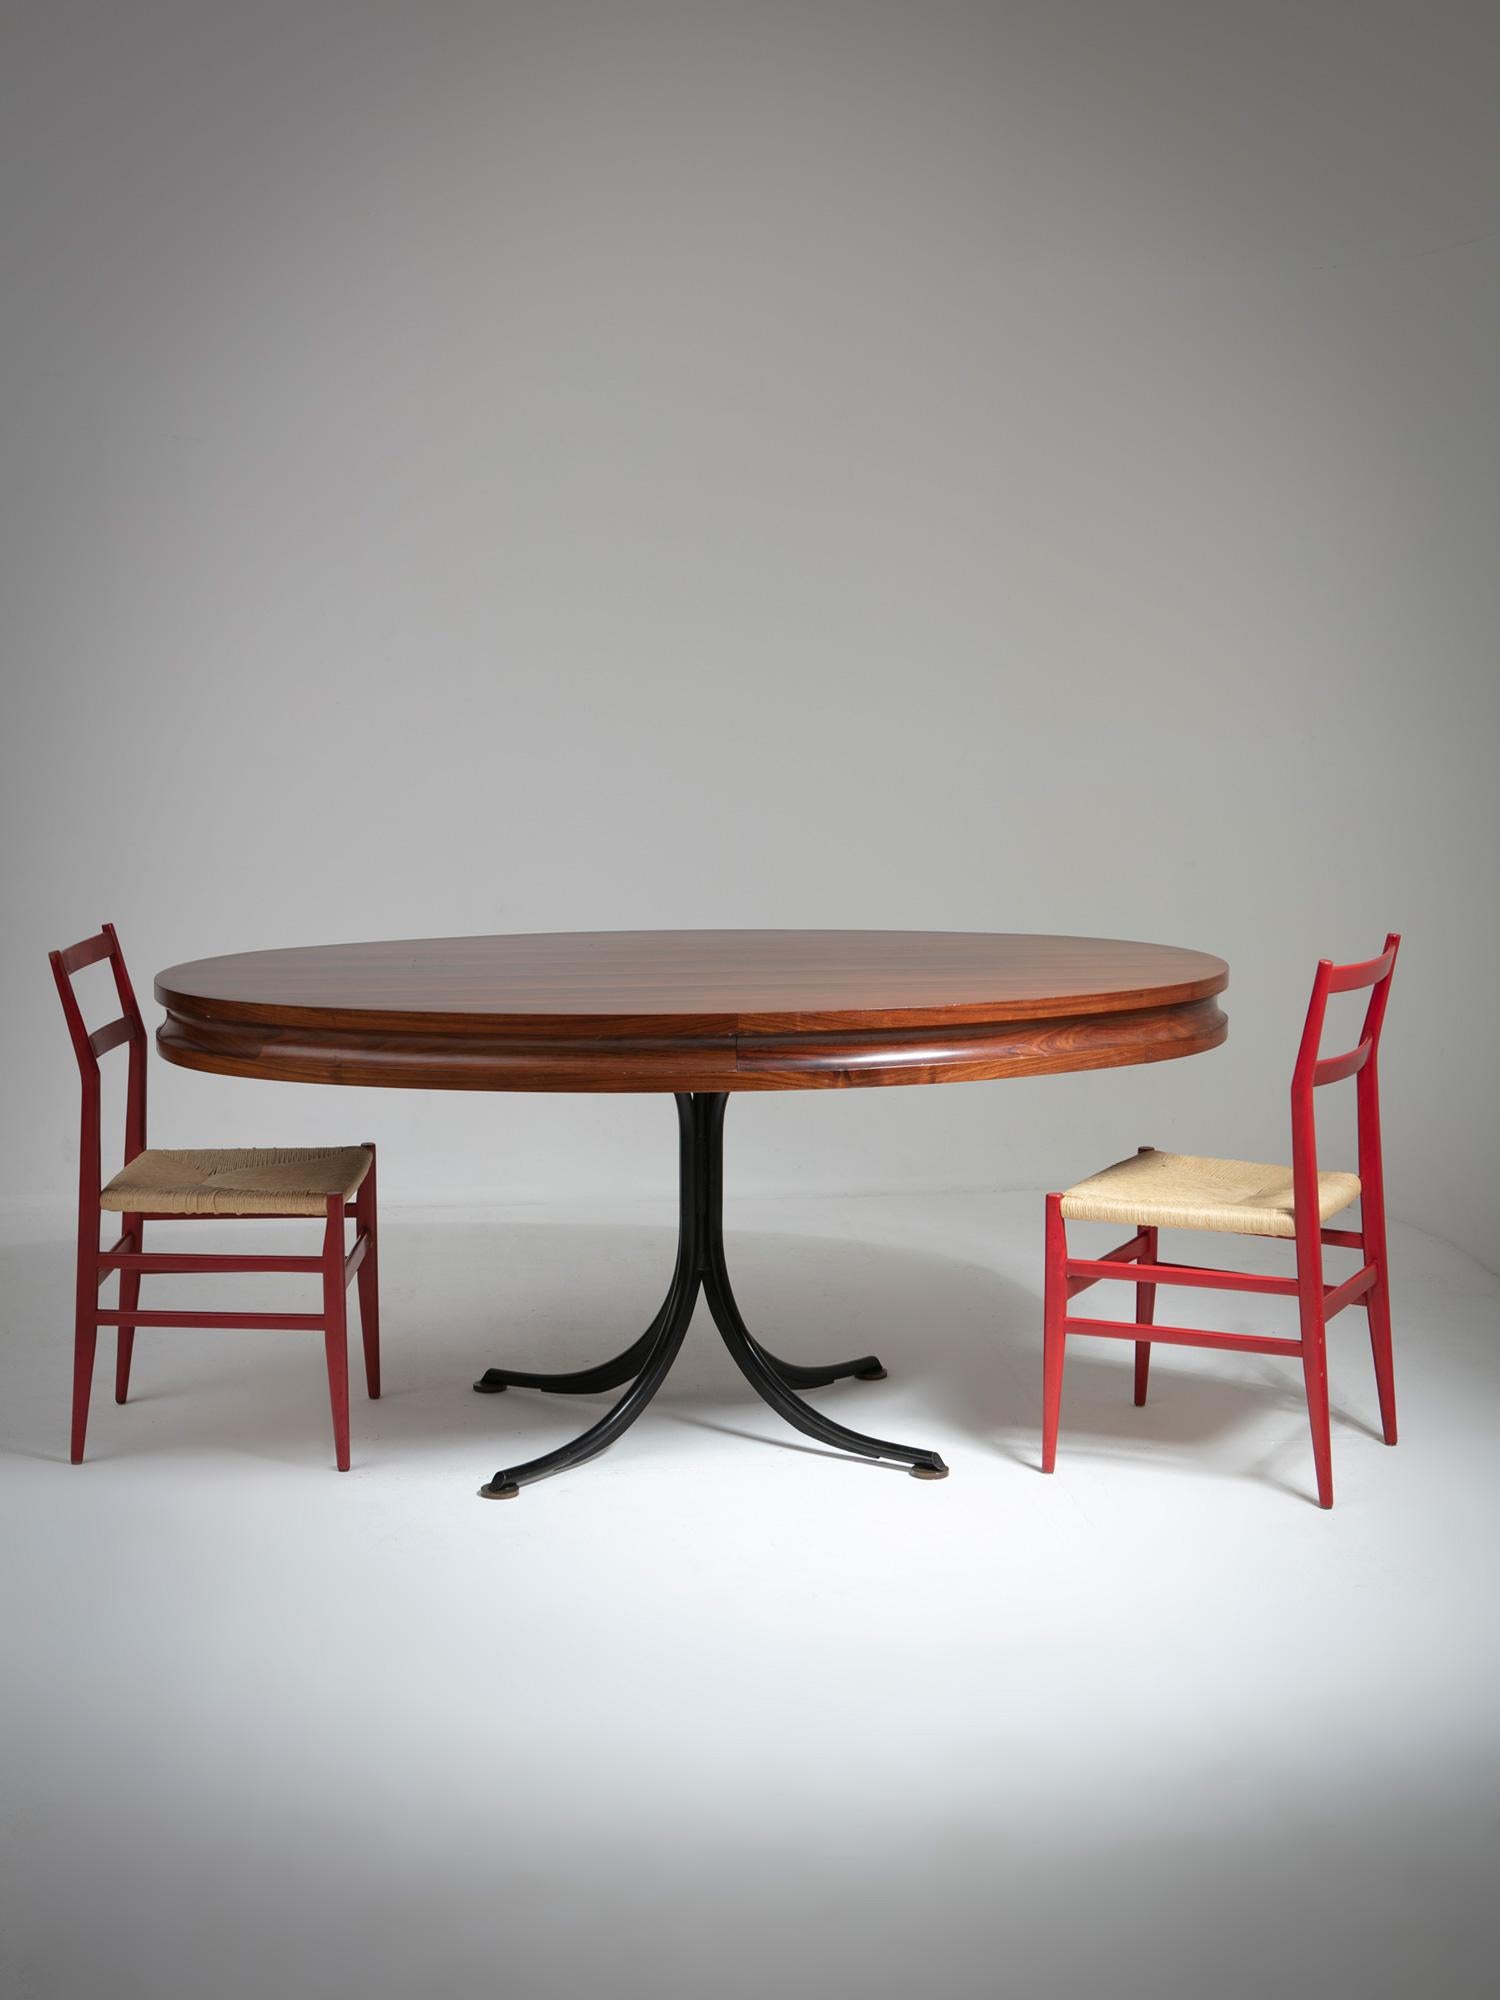 One-off Oval Wood and Metal Table by Adelmo Rascaroli, Italy, 1960s For Sale 1